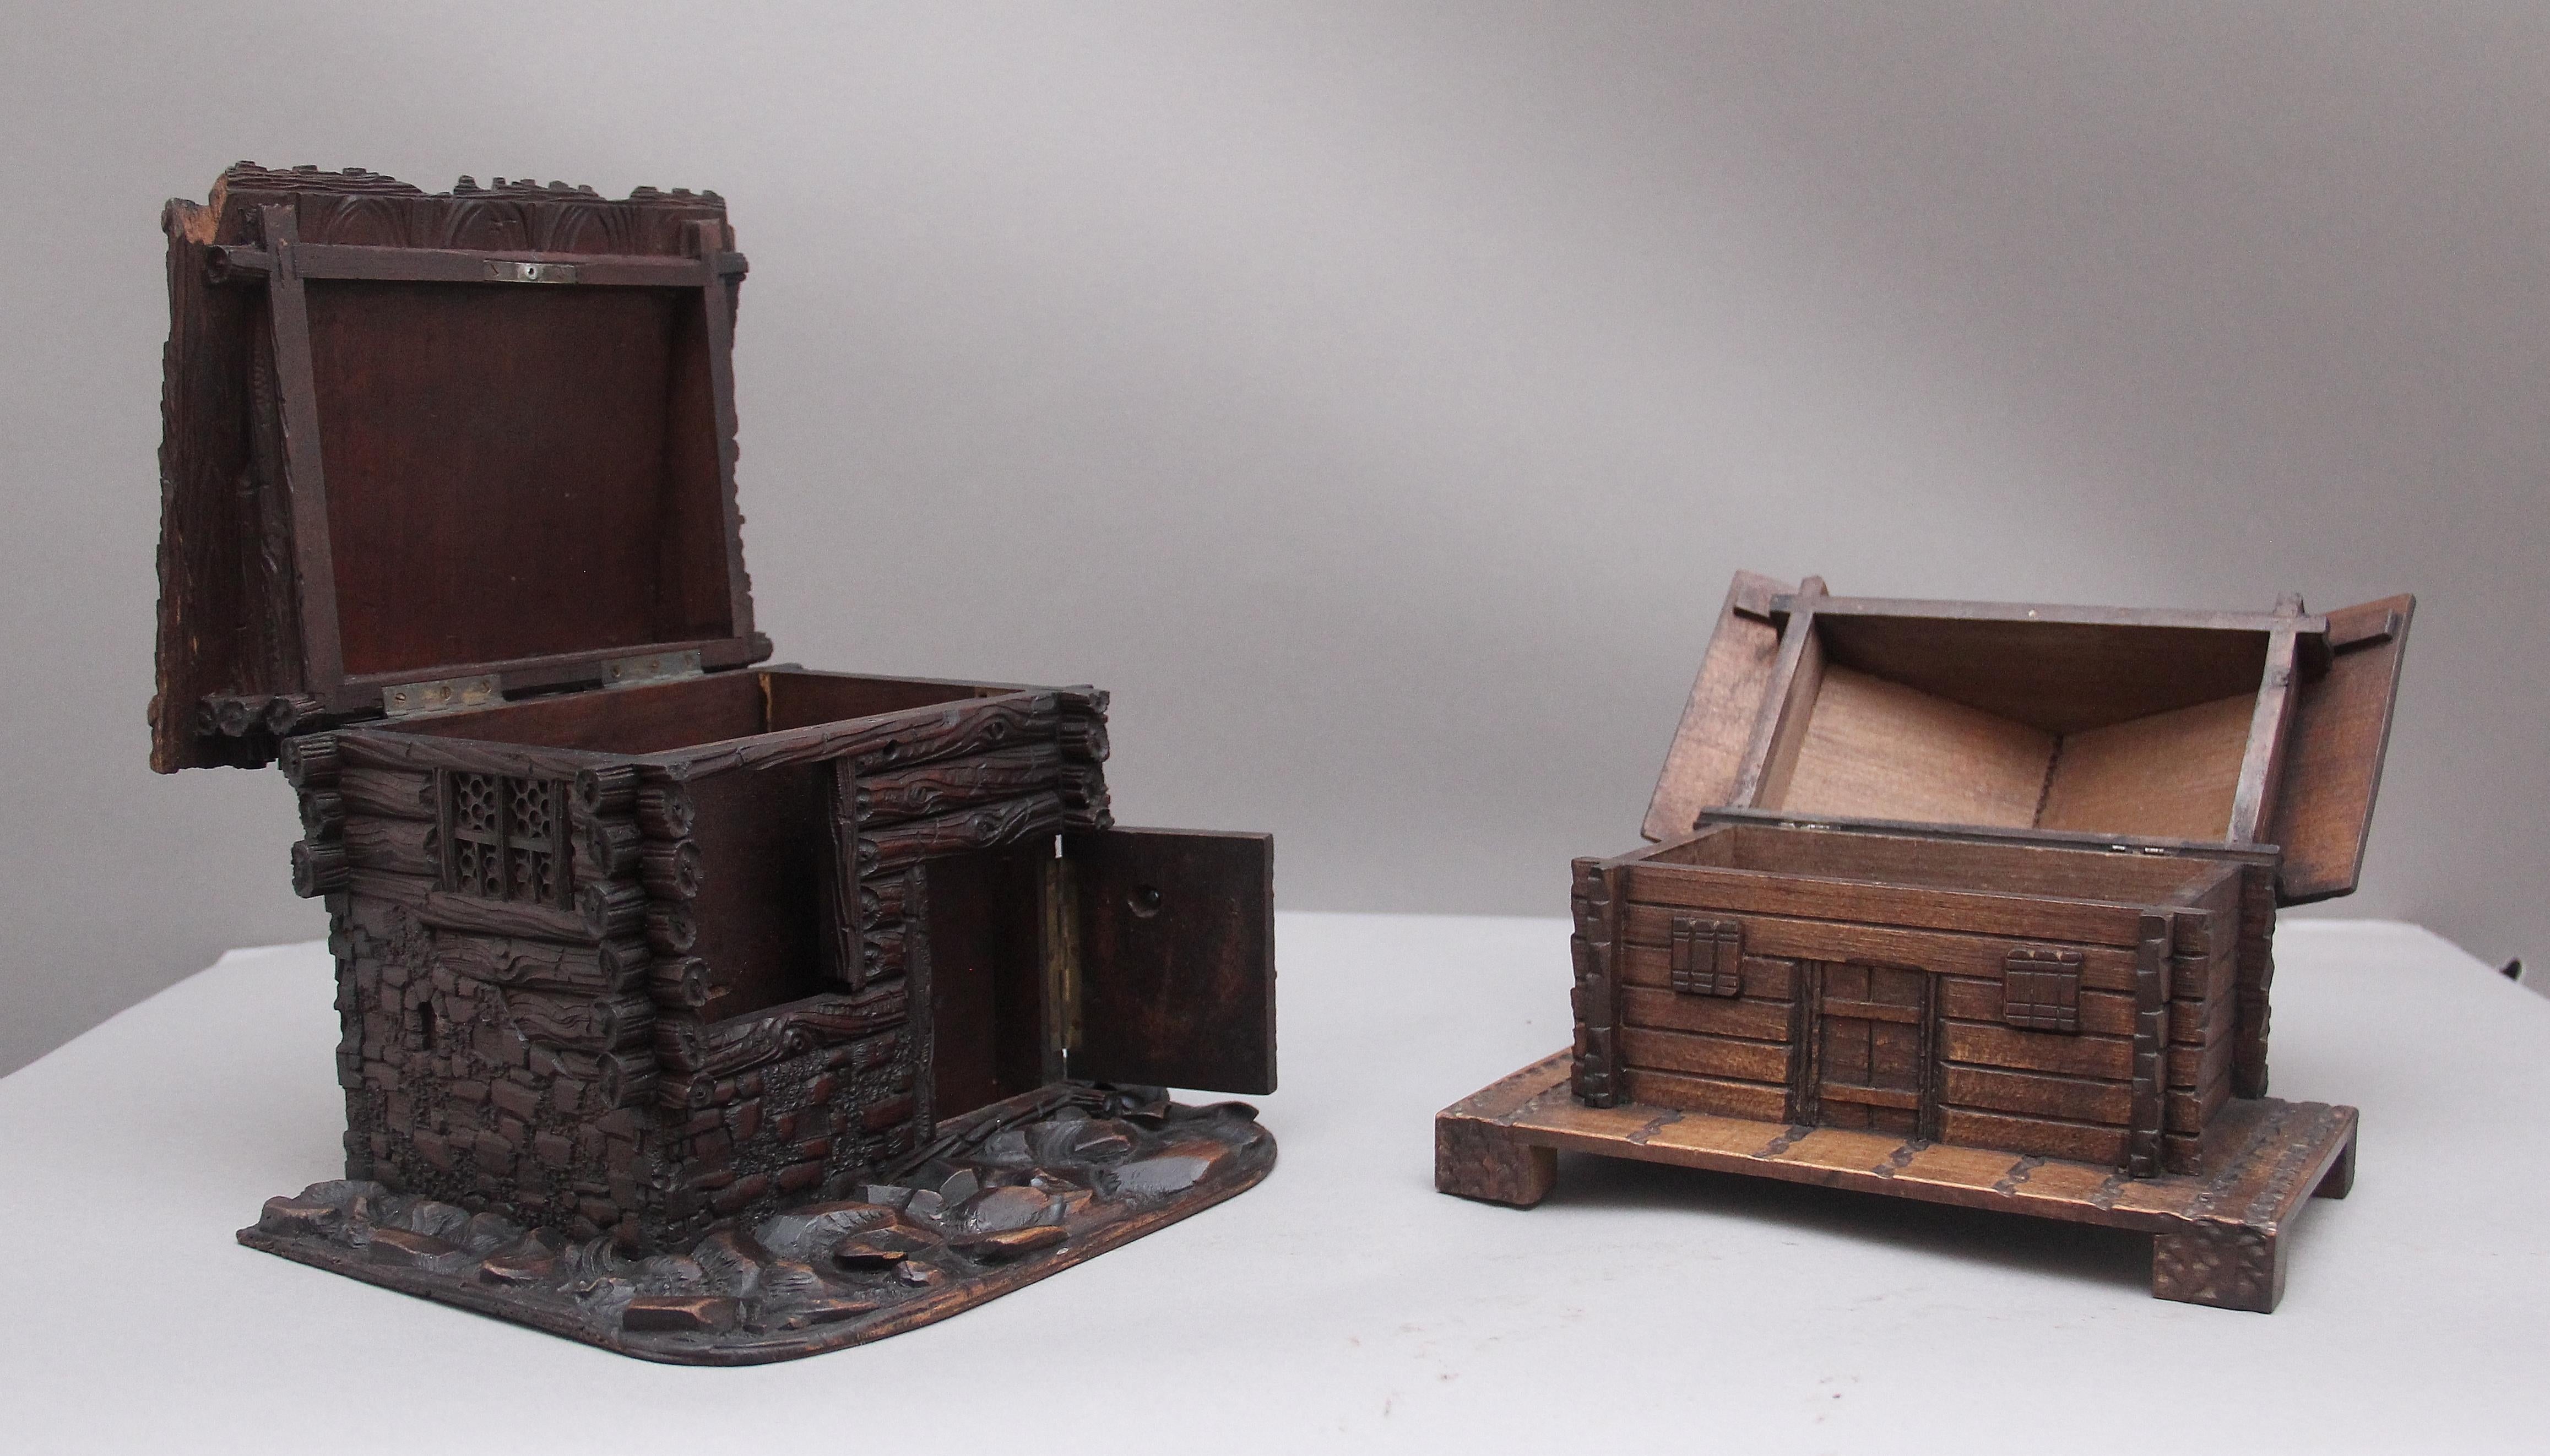 Two decorative 19th Century black forest cottages with each roof lifting up to reveal compartment space, both cottages are in very good condition. Circa 1880.